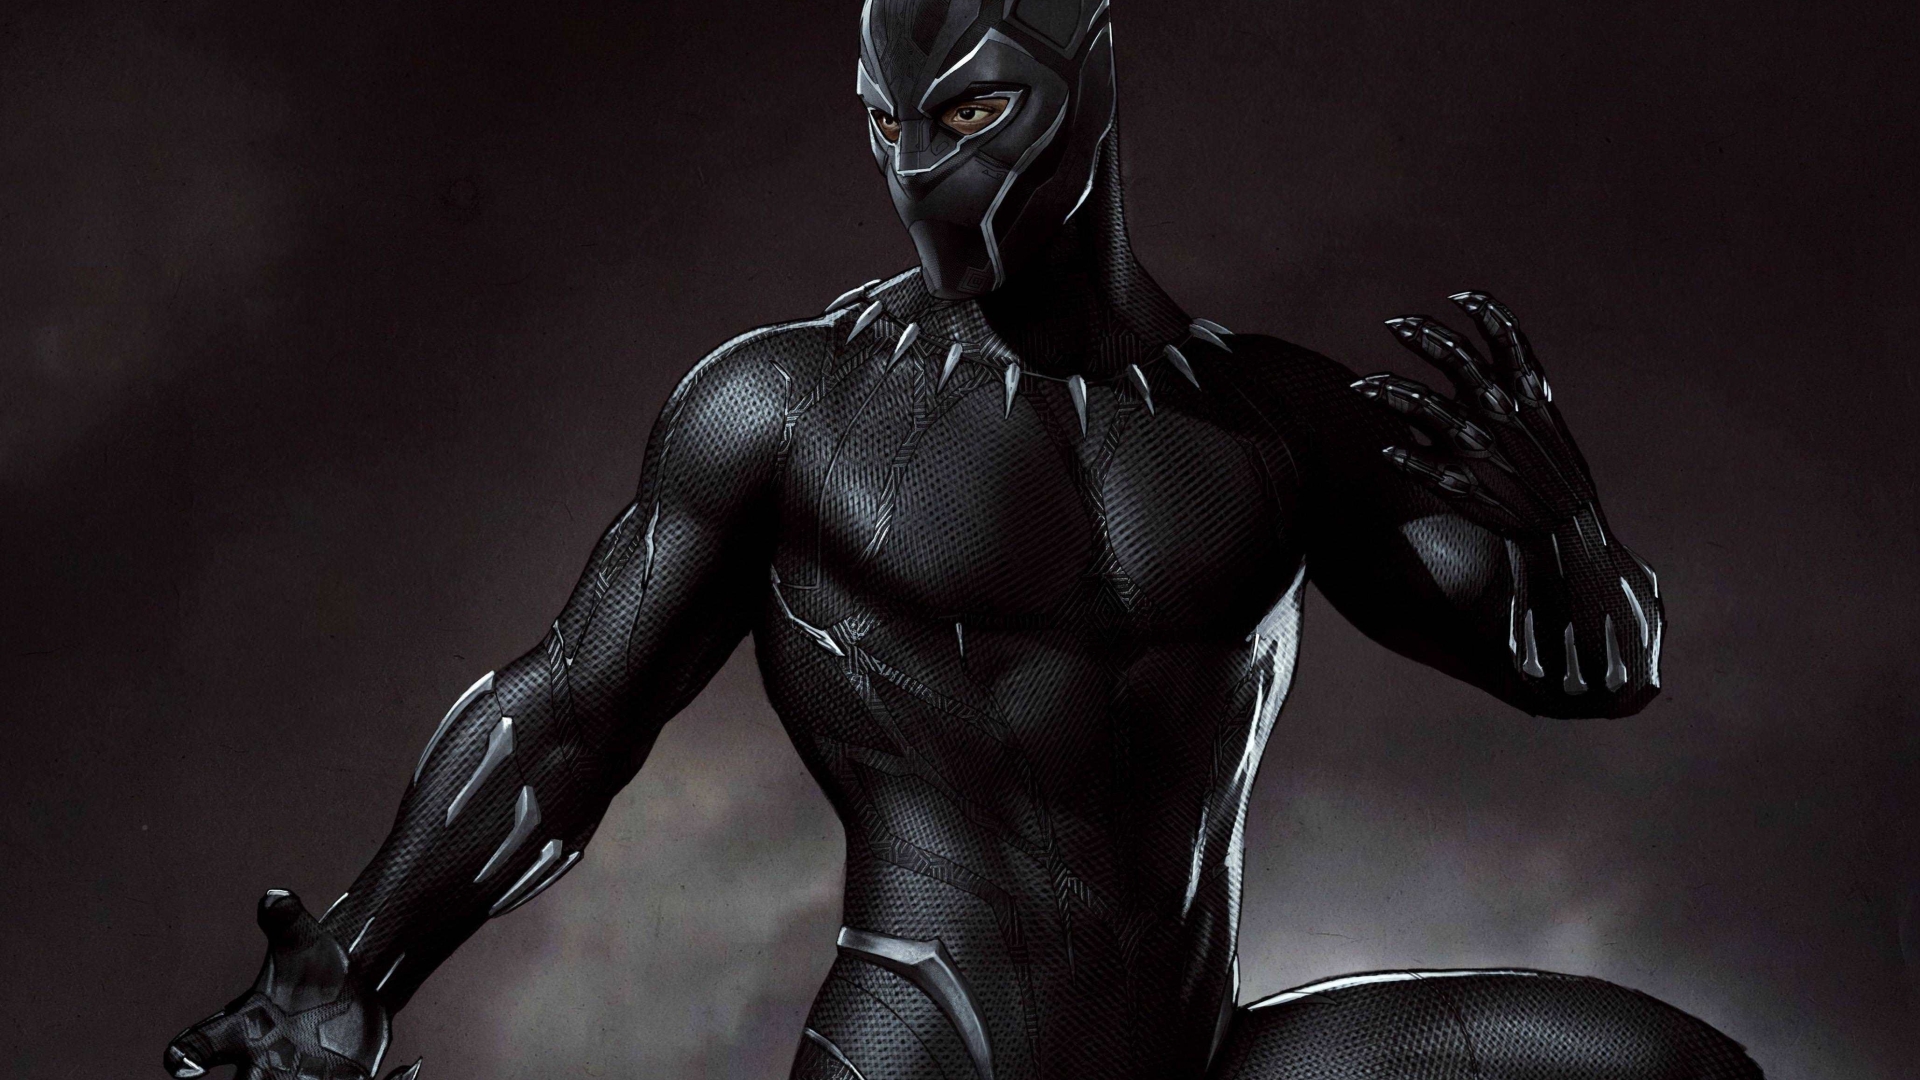 Best Black Panther Hd Wallpaper 1920  1080 of the decade The ultimate guide 